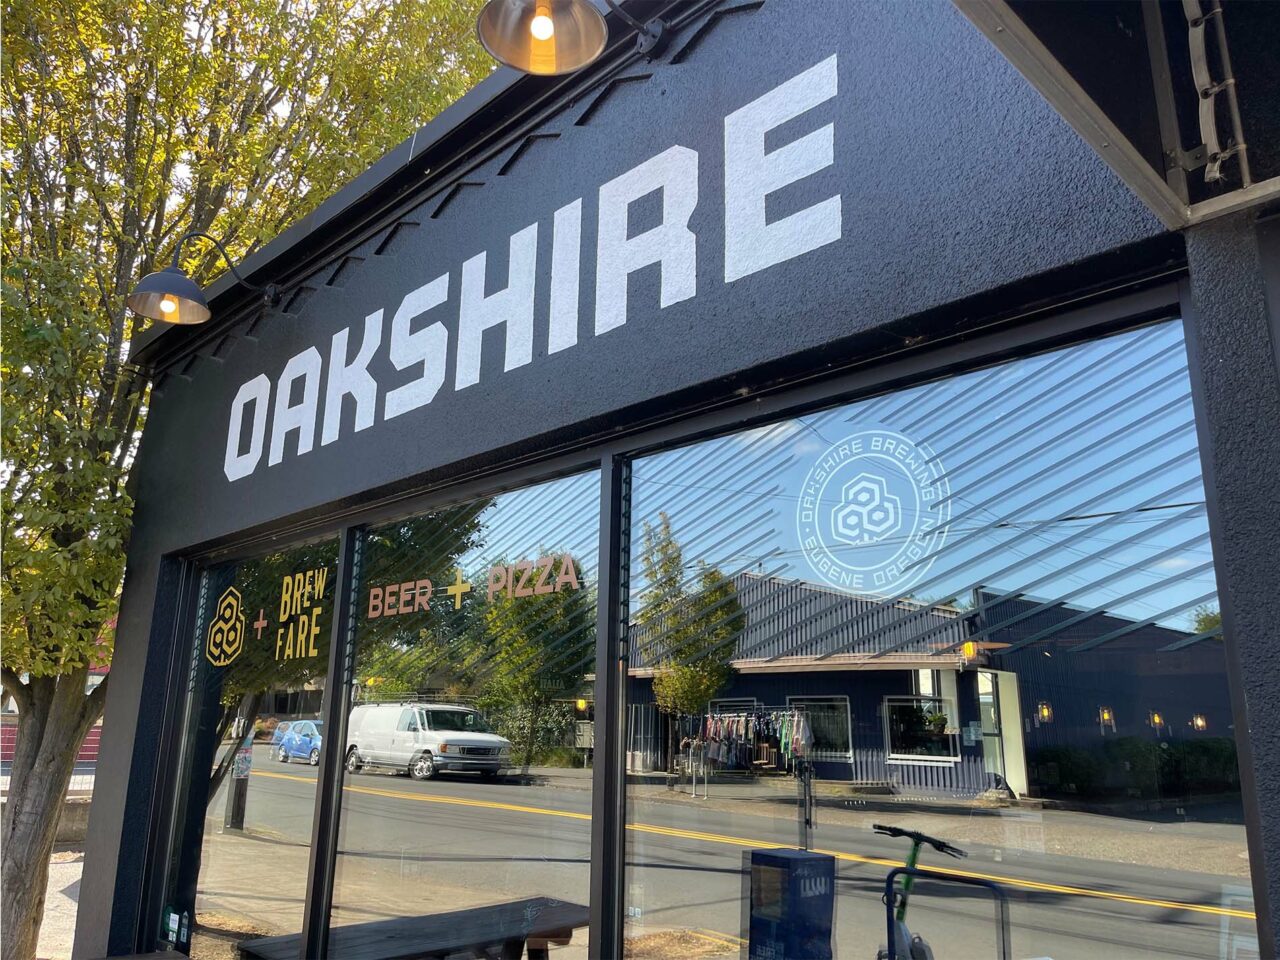 Example of Morel's wide format printing capabilities, showing signage at Oakshire Brewery